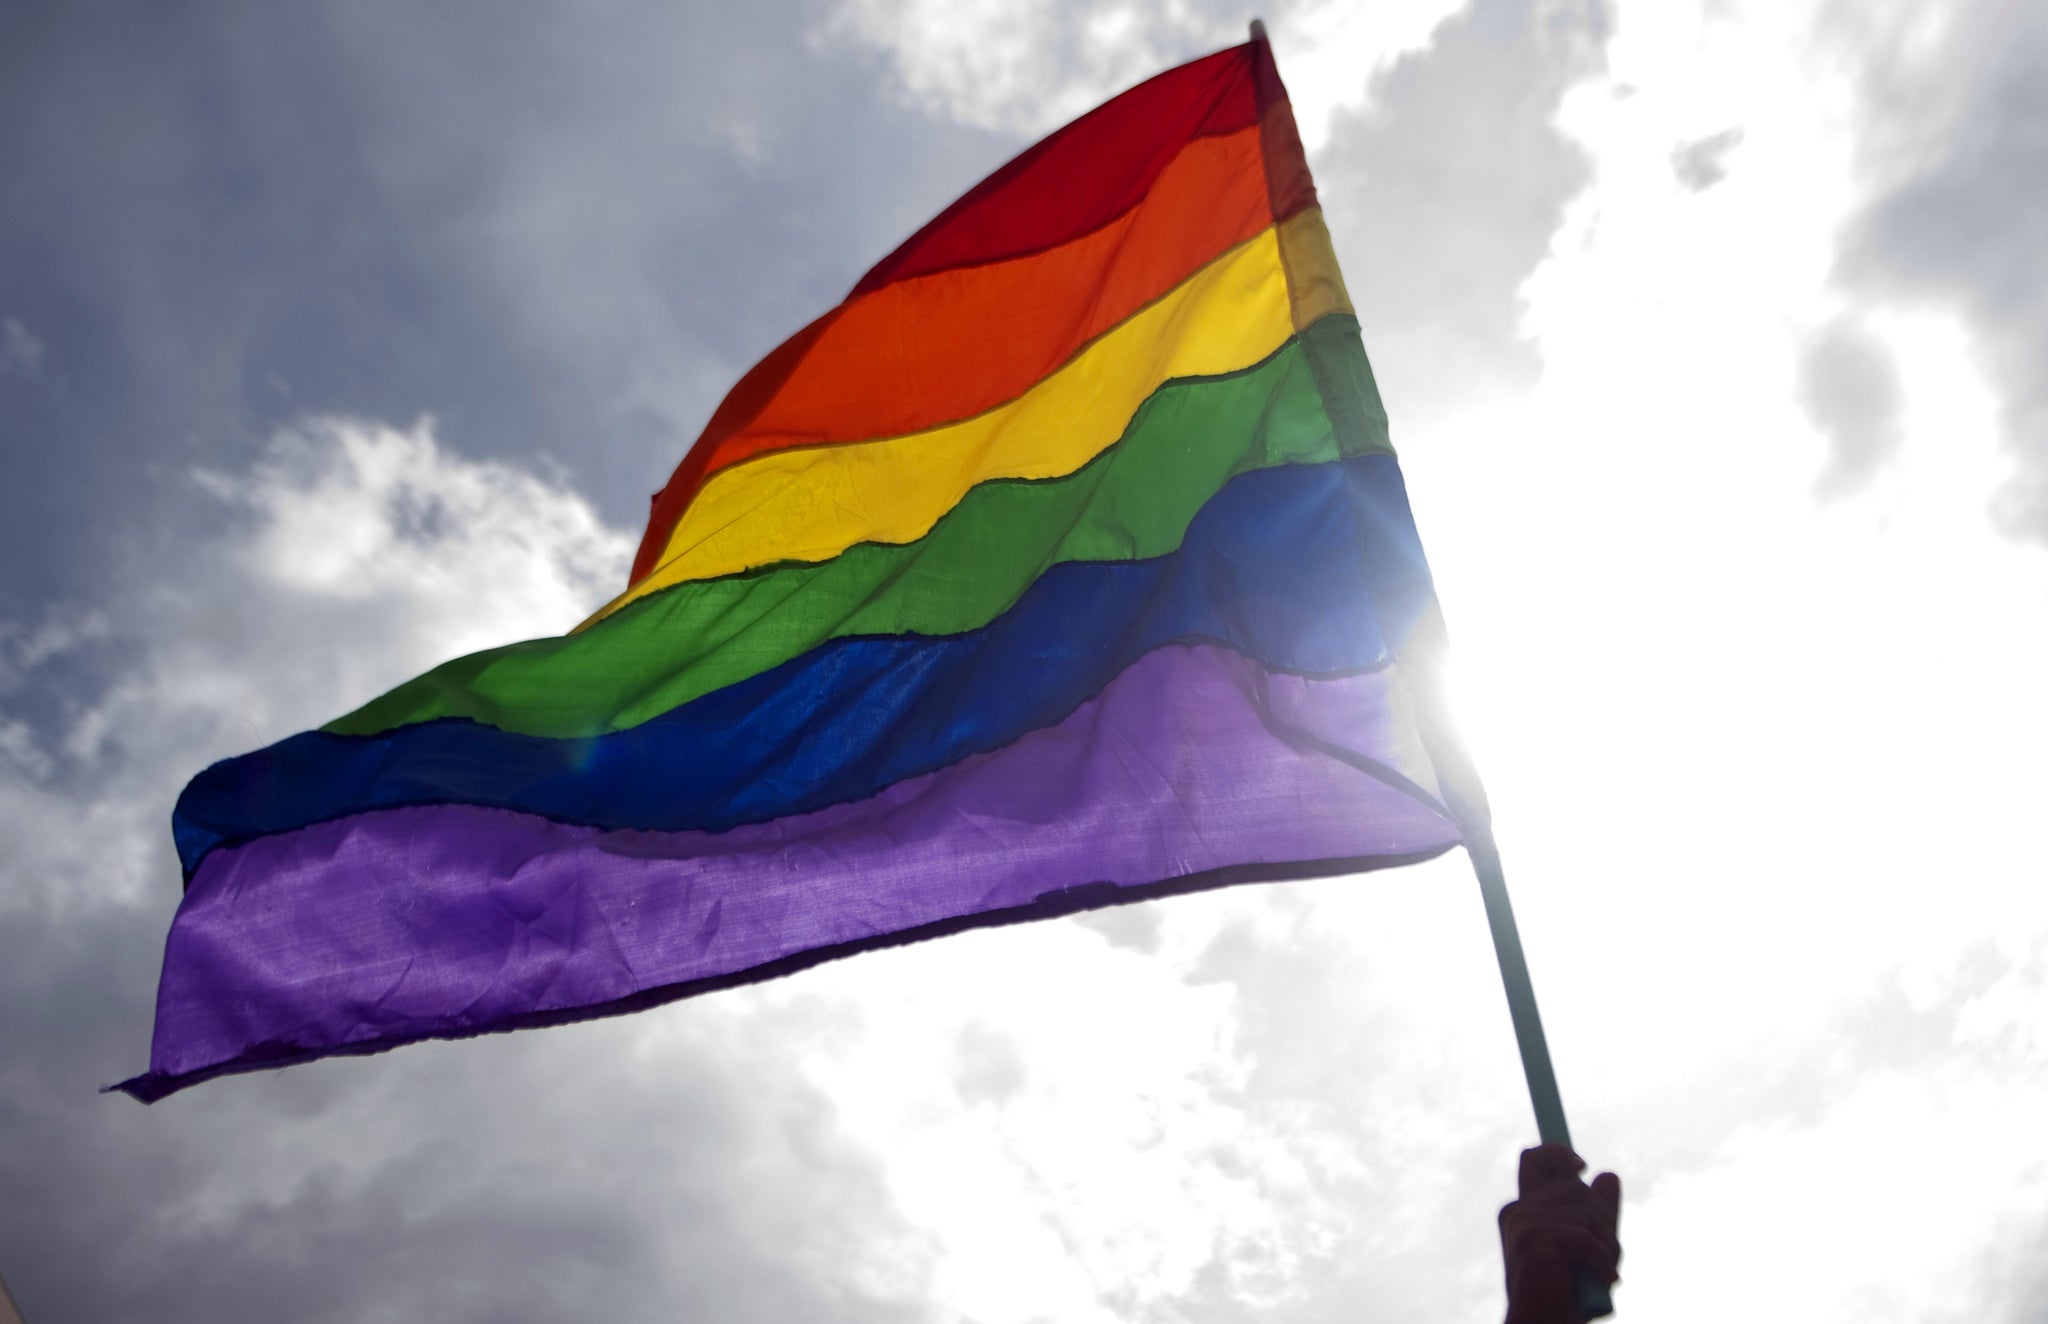 A protester waves a rainbow flag at a protest in support of gay rights.